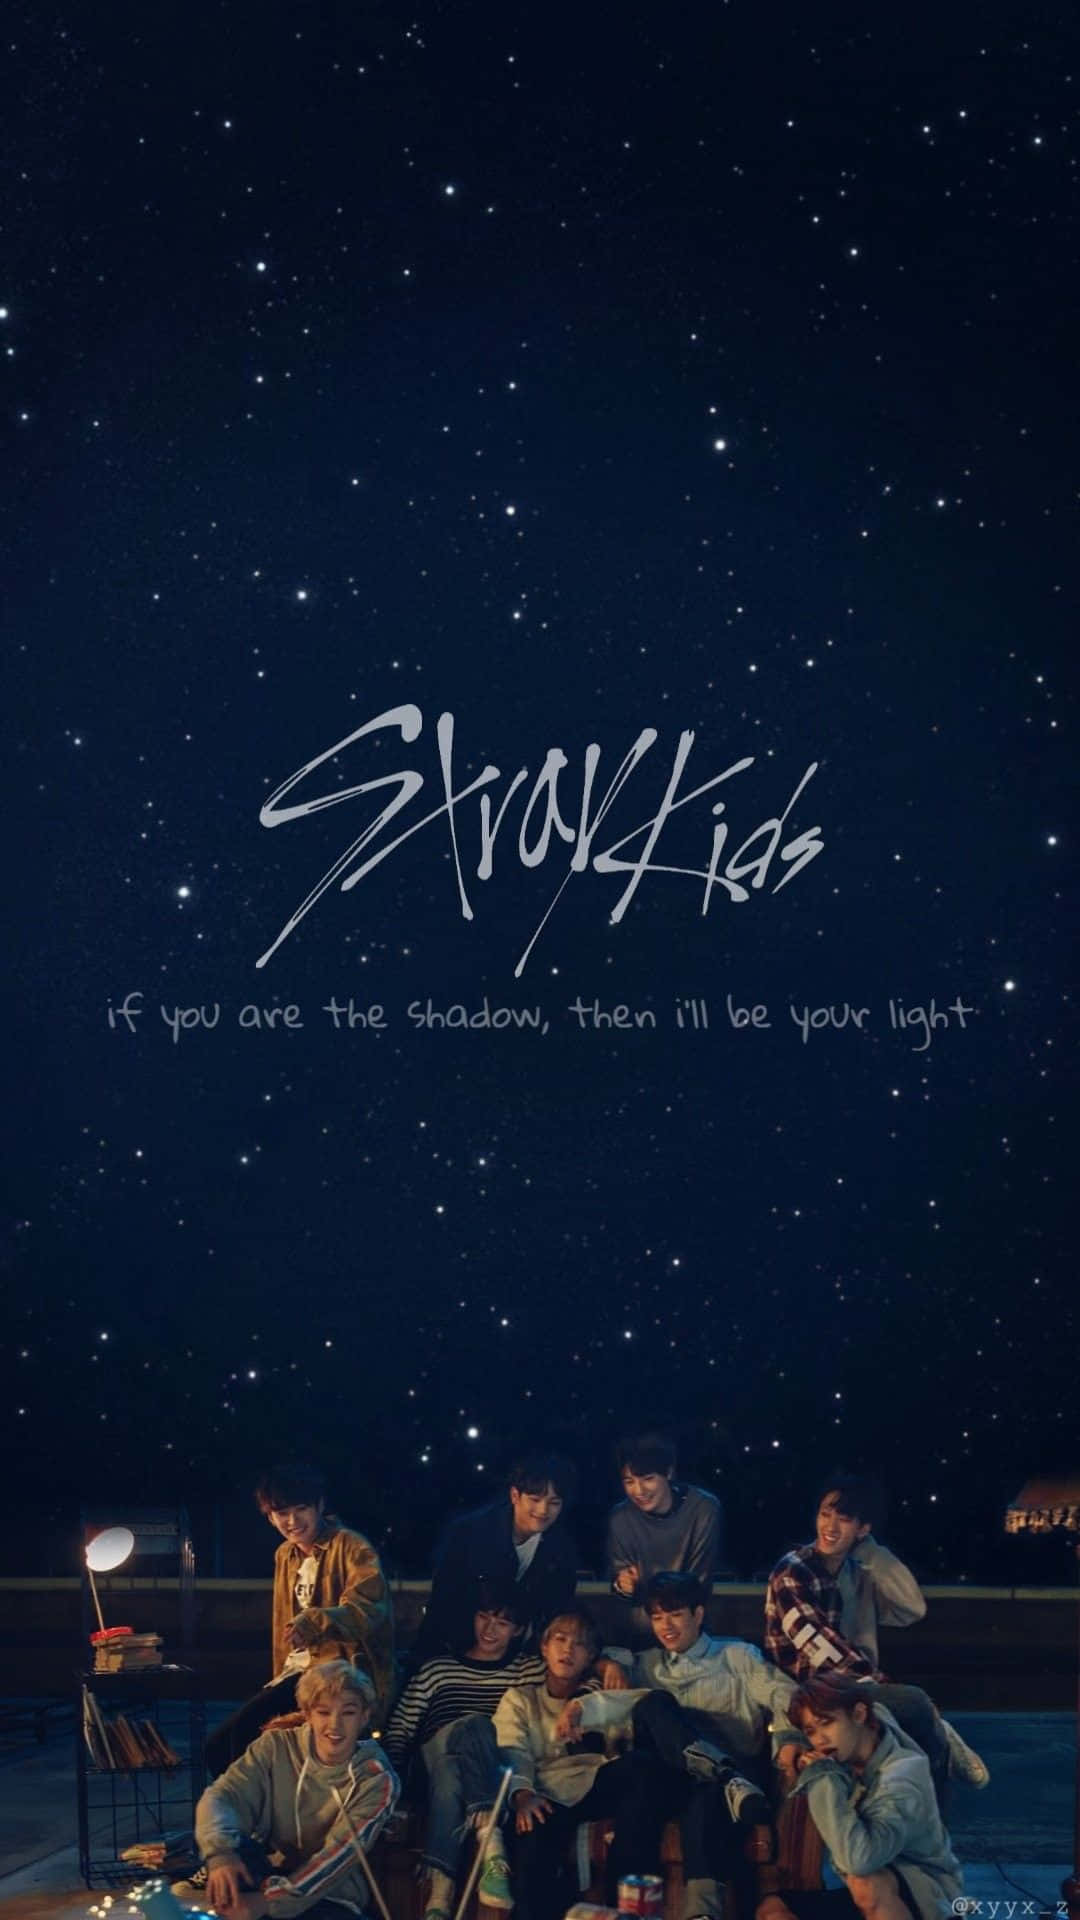 Their rise to the top in 2020 is undeniable. Stray Kids have been making waves. Wallpaper